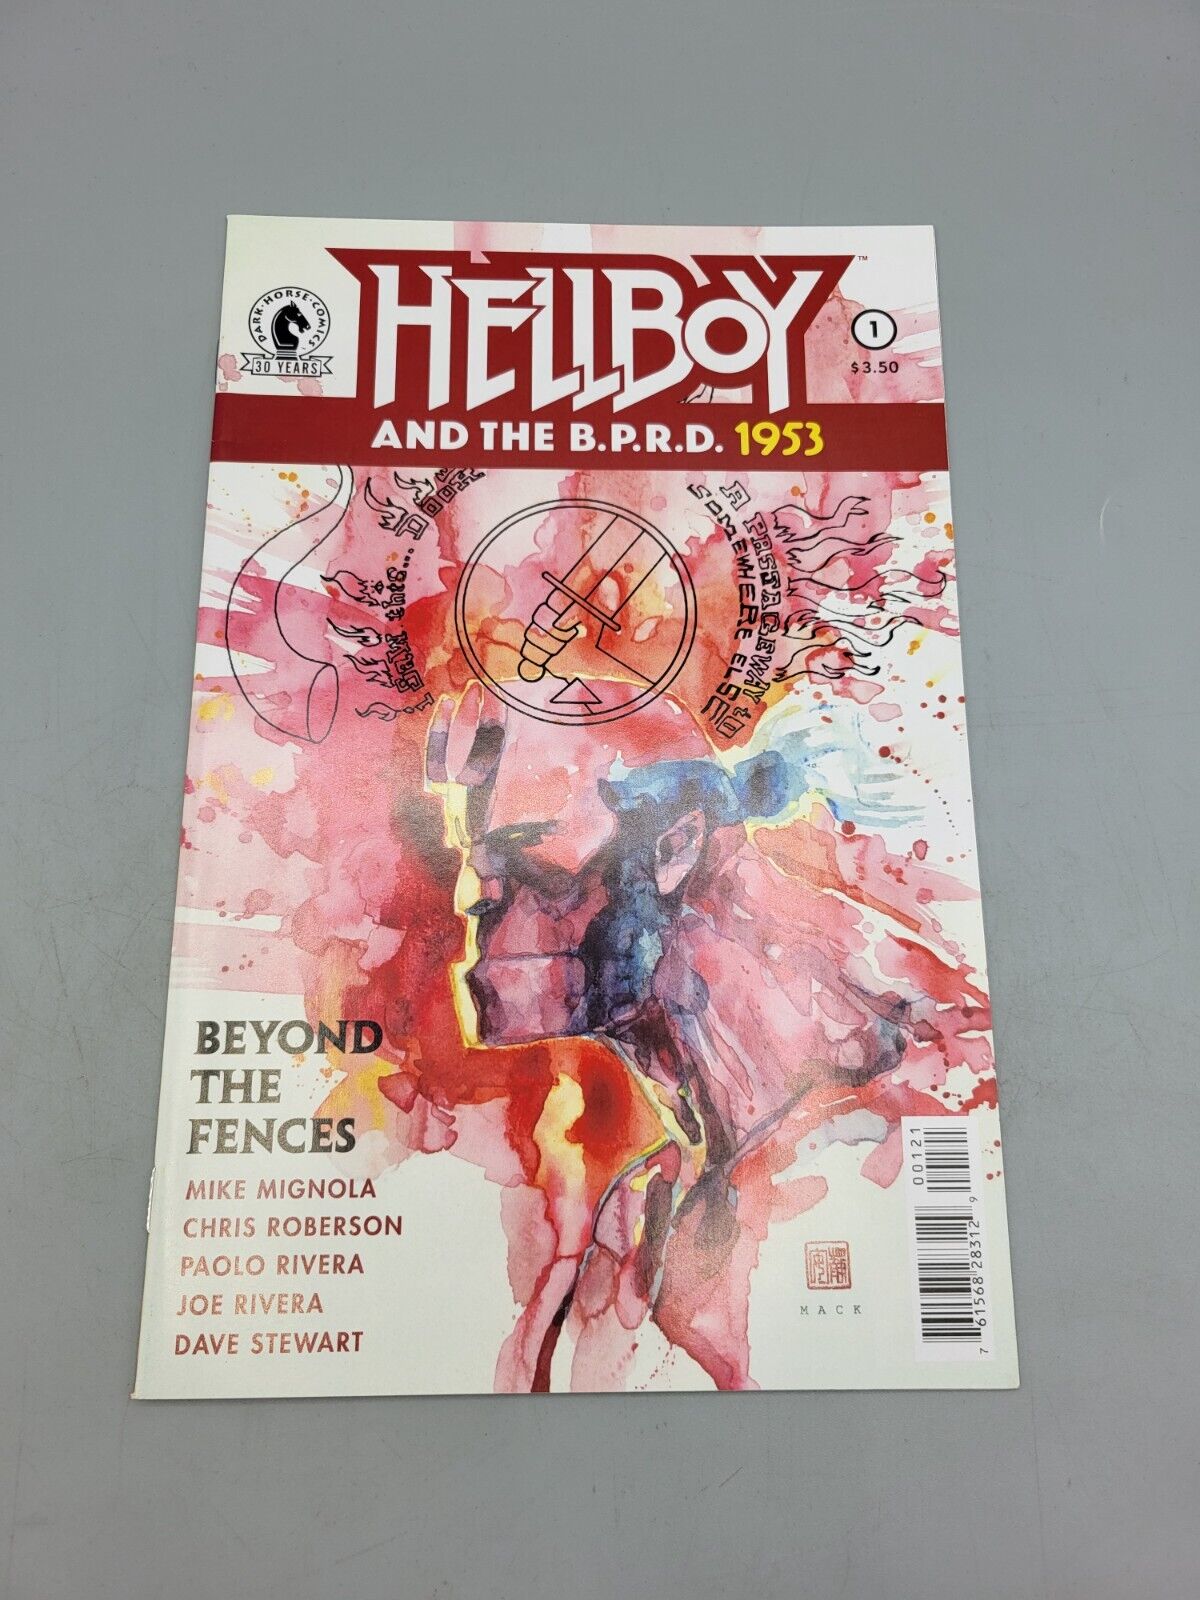 Hellboy and the B.P.R.D 1953 #1 February 2016 Cover Variant B Dark Horse Comic